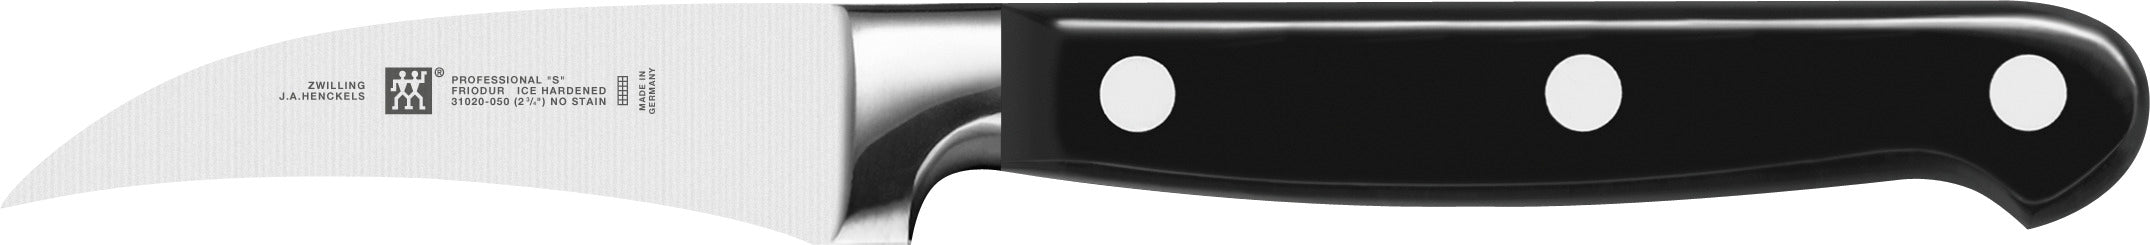 Zwilling PROFESSIONAL S Forged paring knife - potato peeler curved blade cm 7